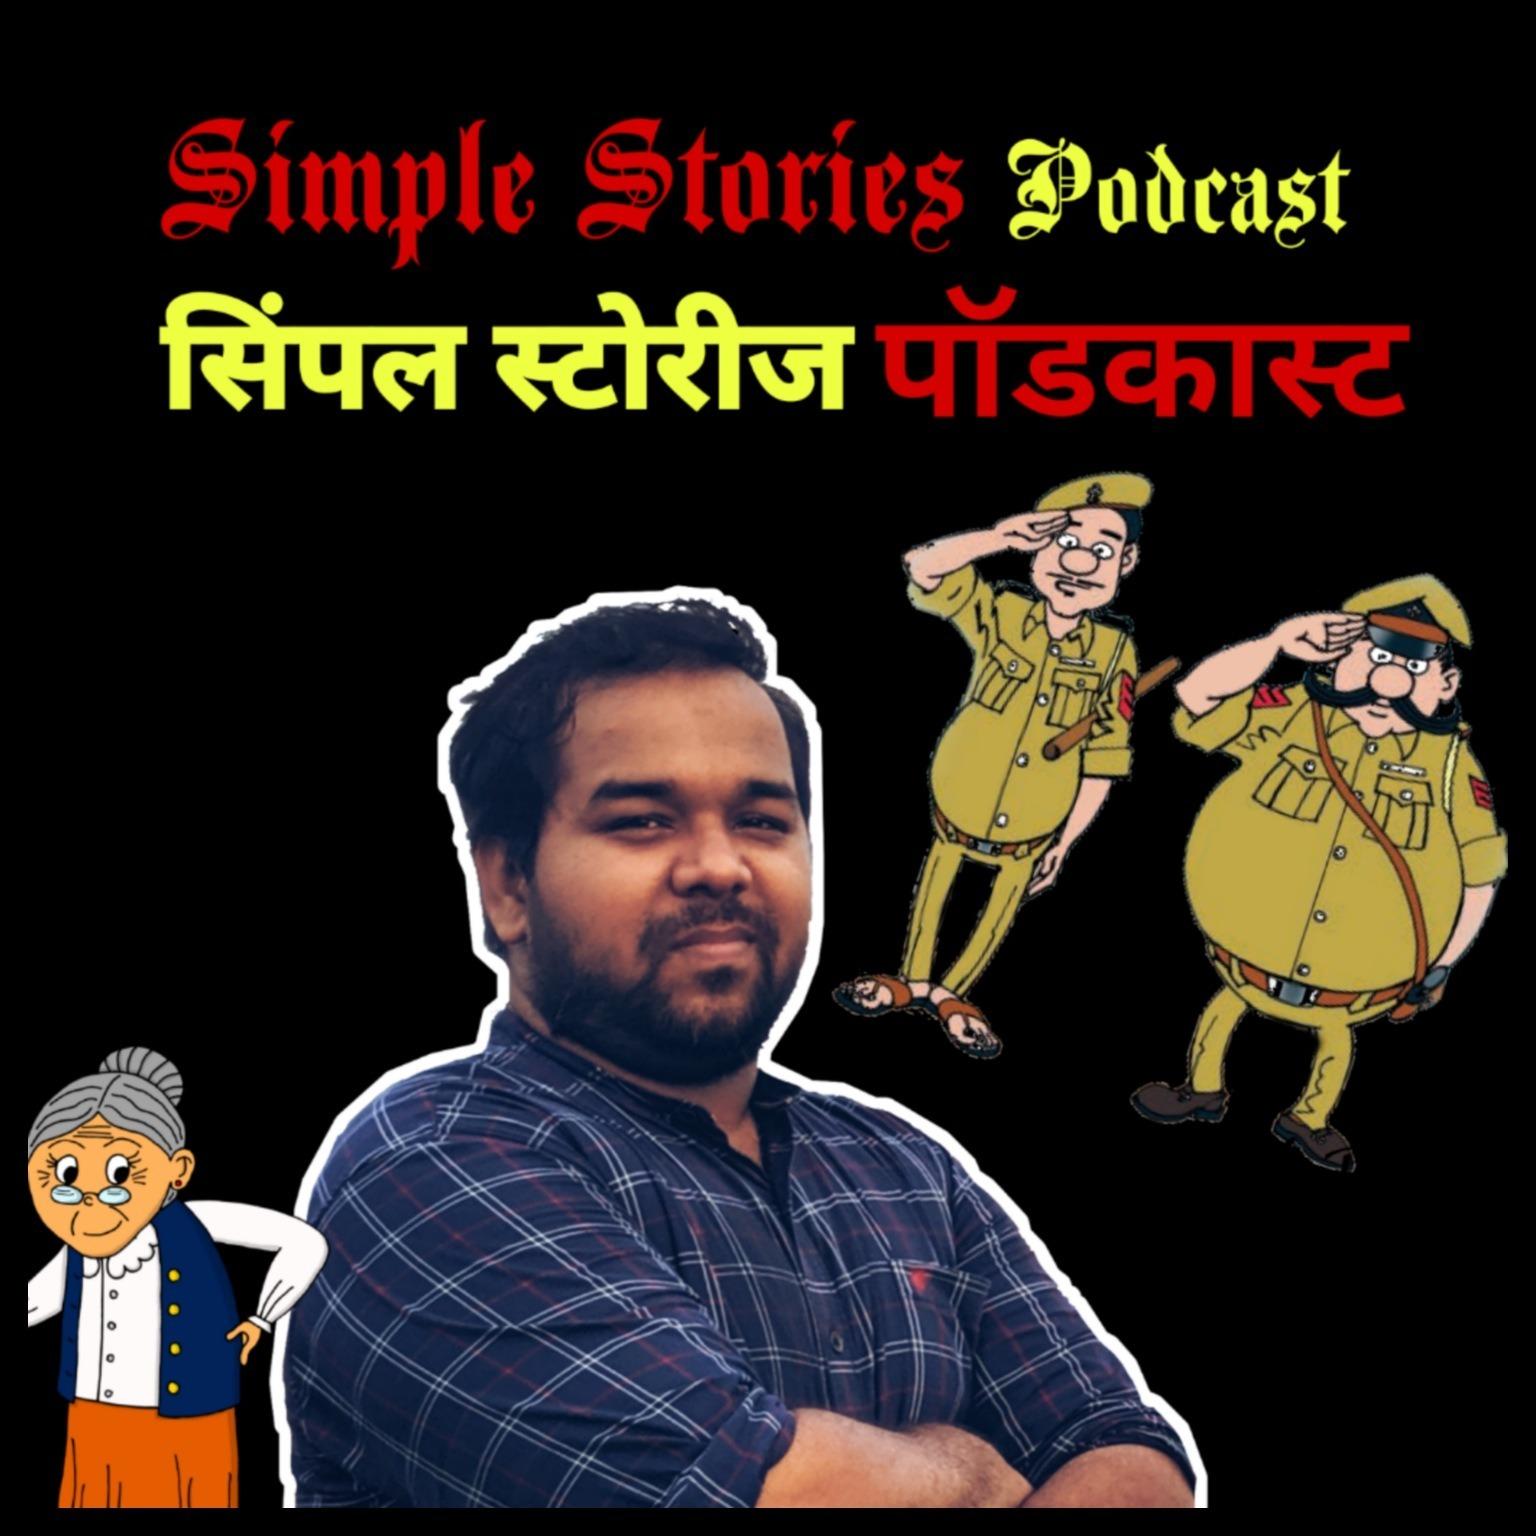 Simple stories podcasts